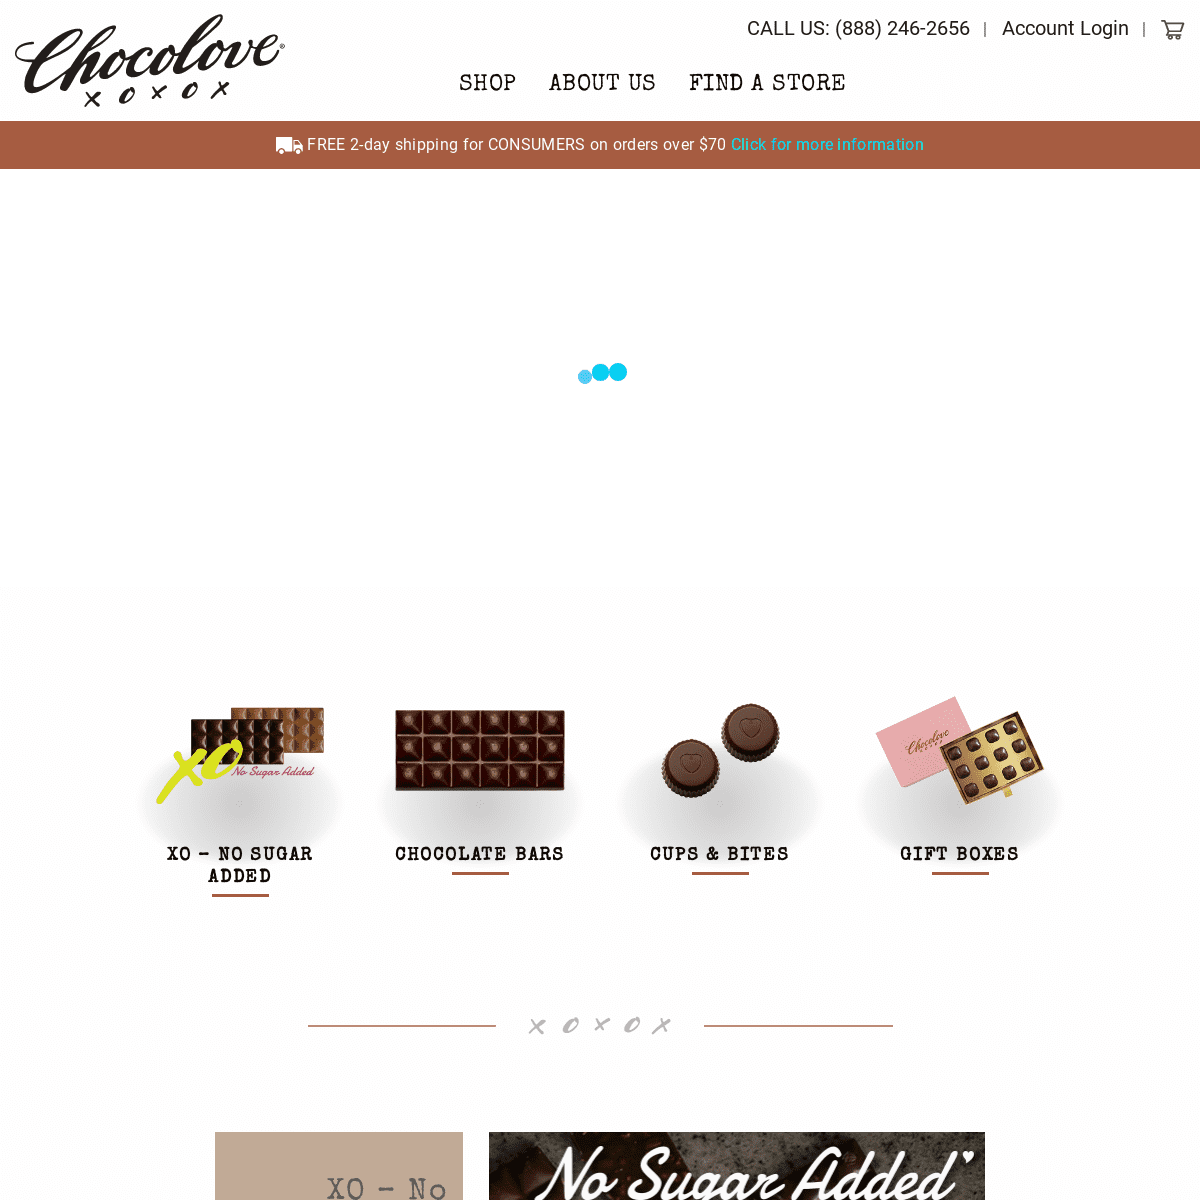 A complete backup of https://chocolove.com